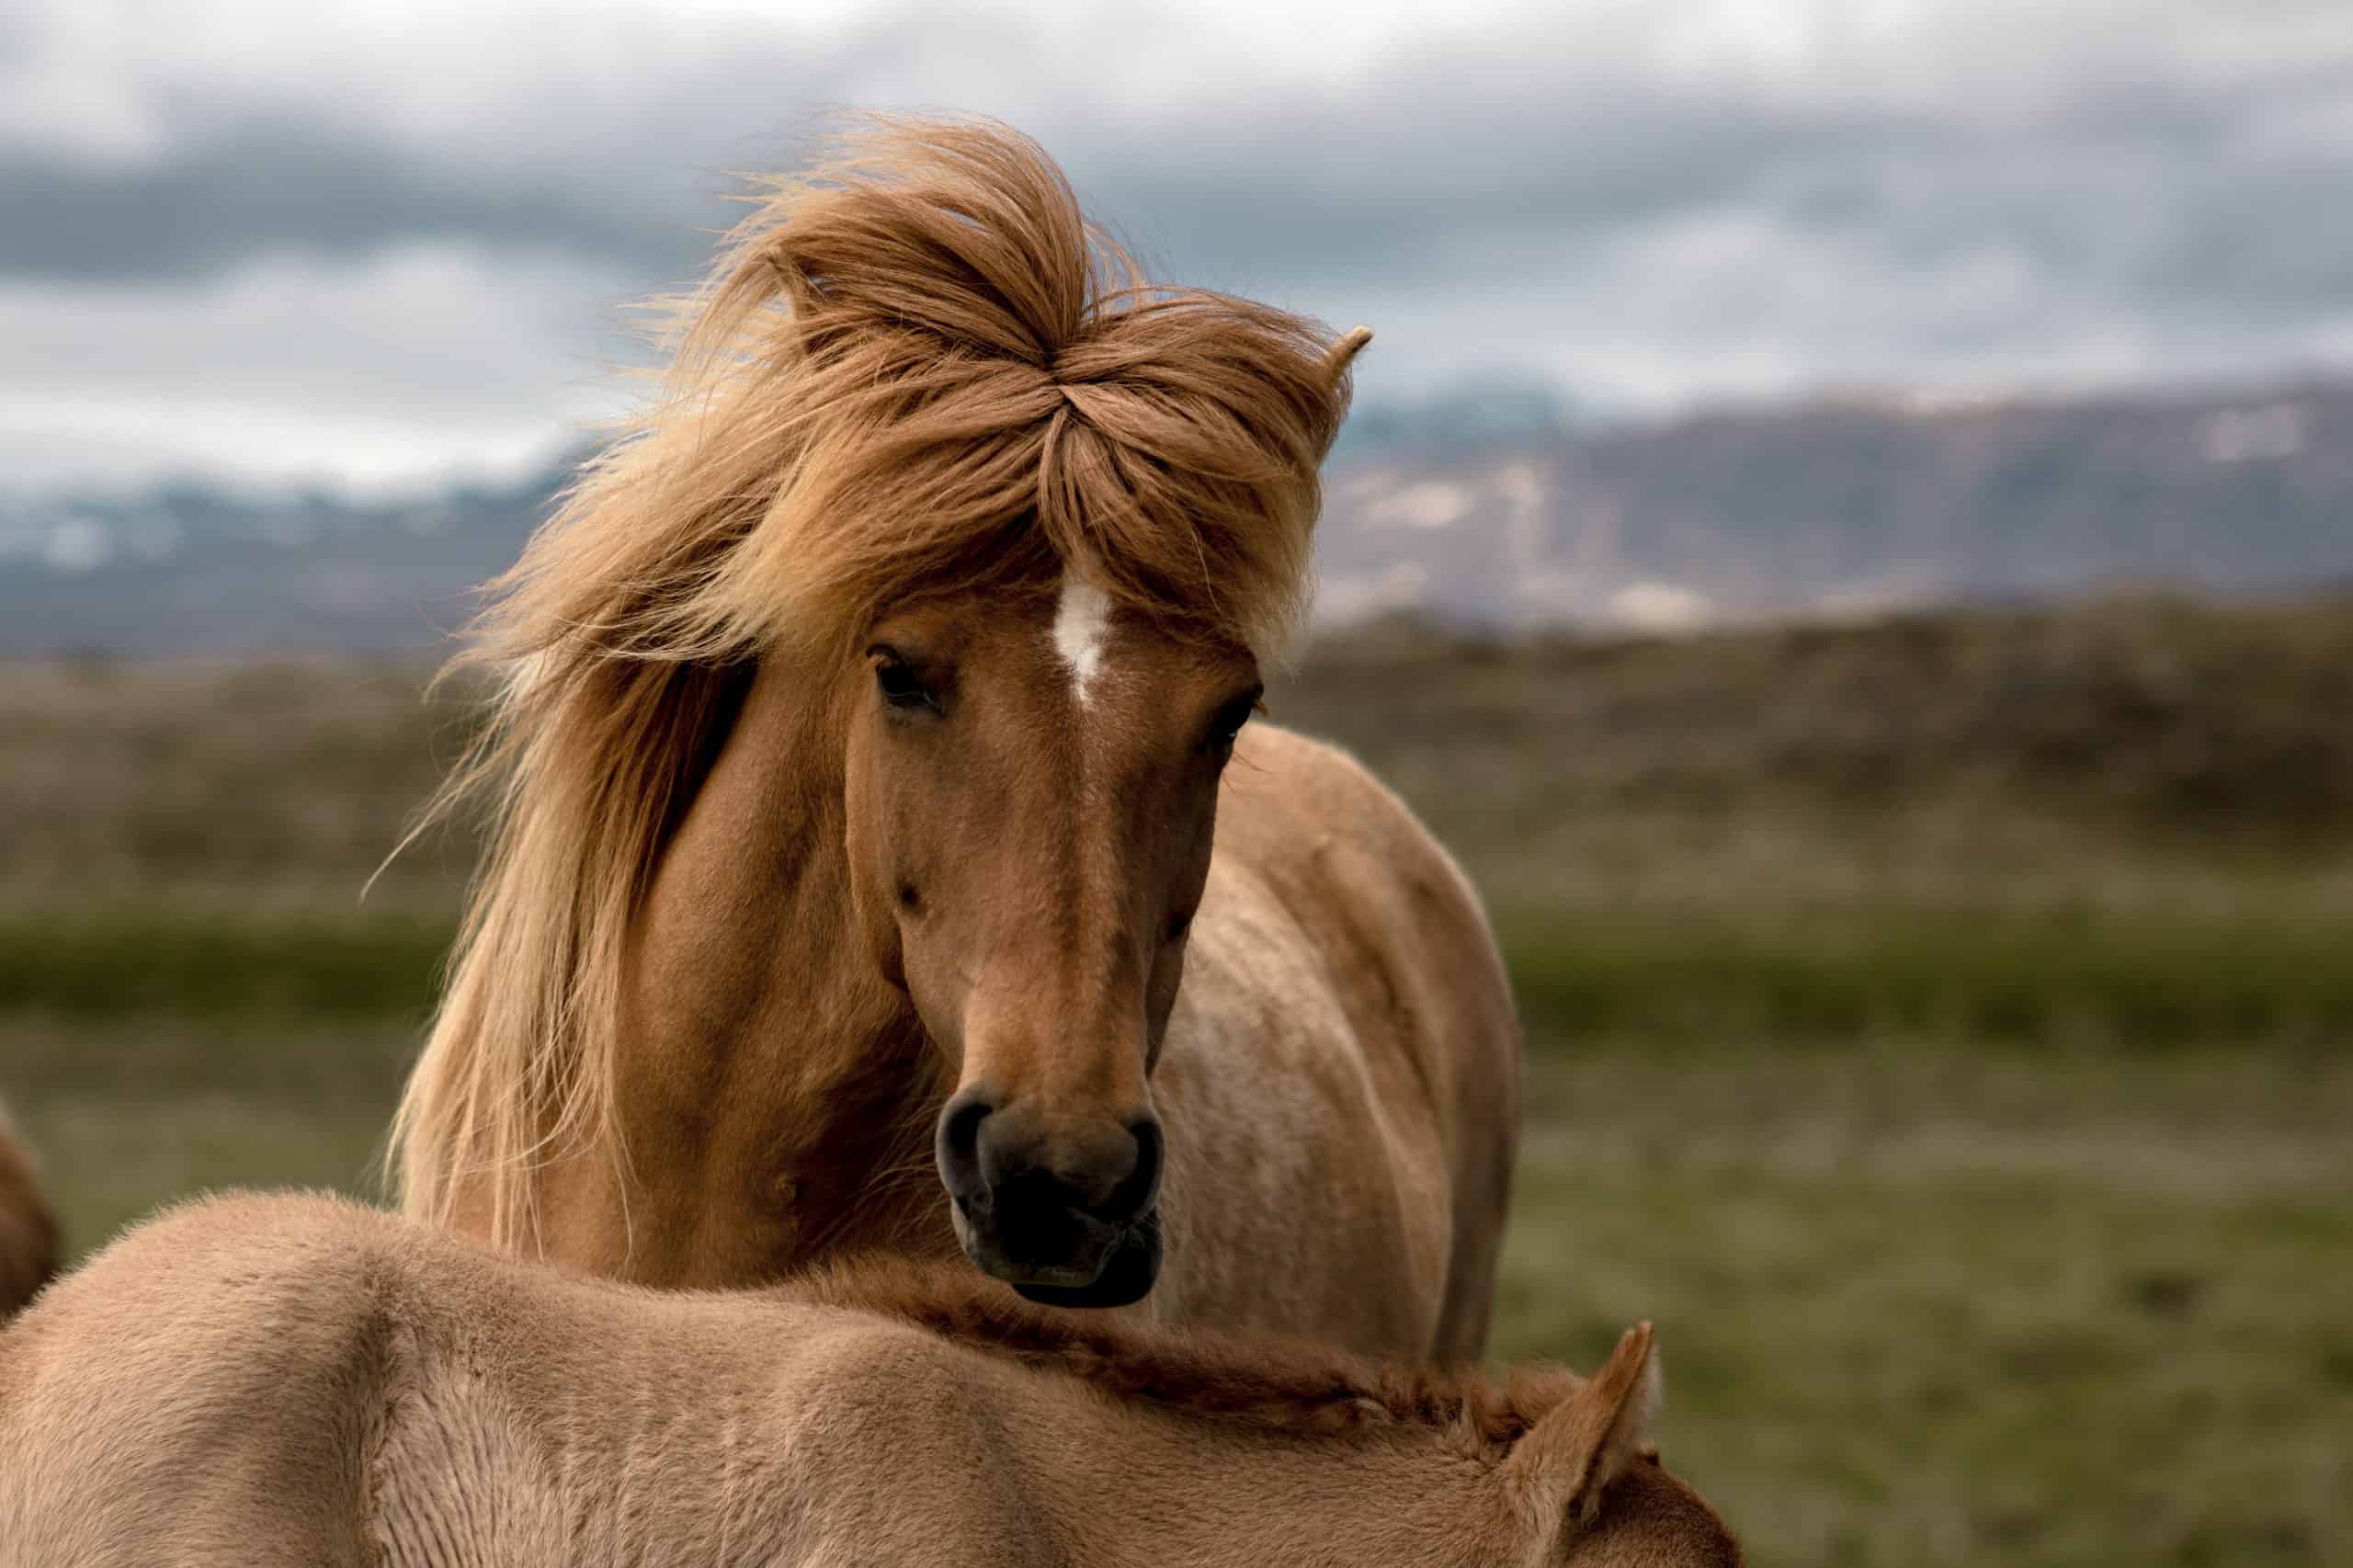 An Icelandic horse mother protecting its foal in front of a mountainous landscape